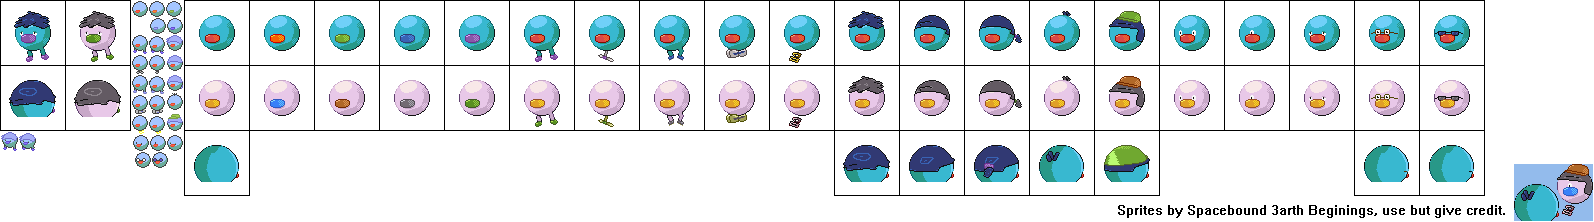 Zoombinis Customs - Zoombinis (Pokémon FireRed / LeafGreen-Style)